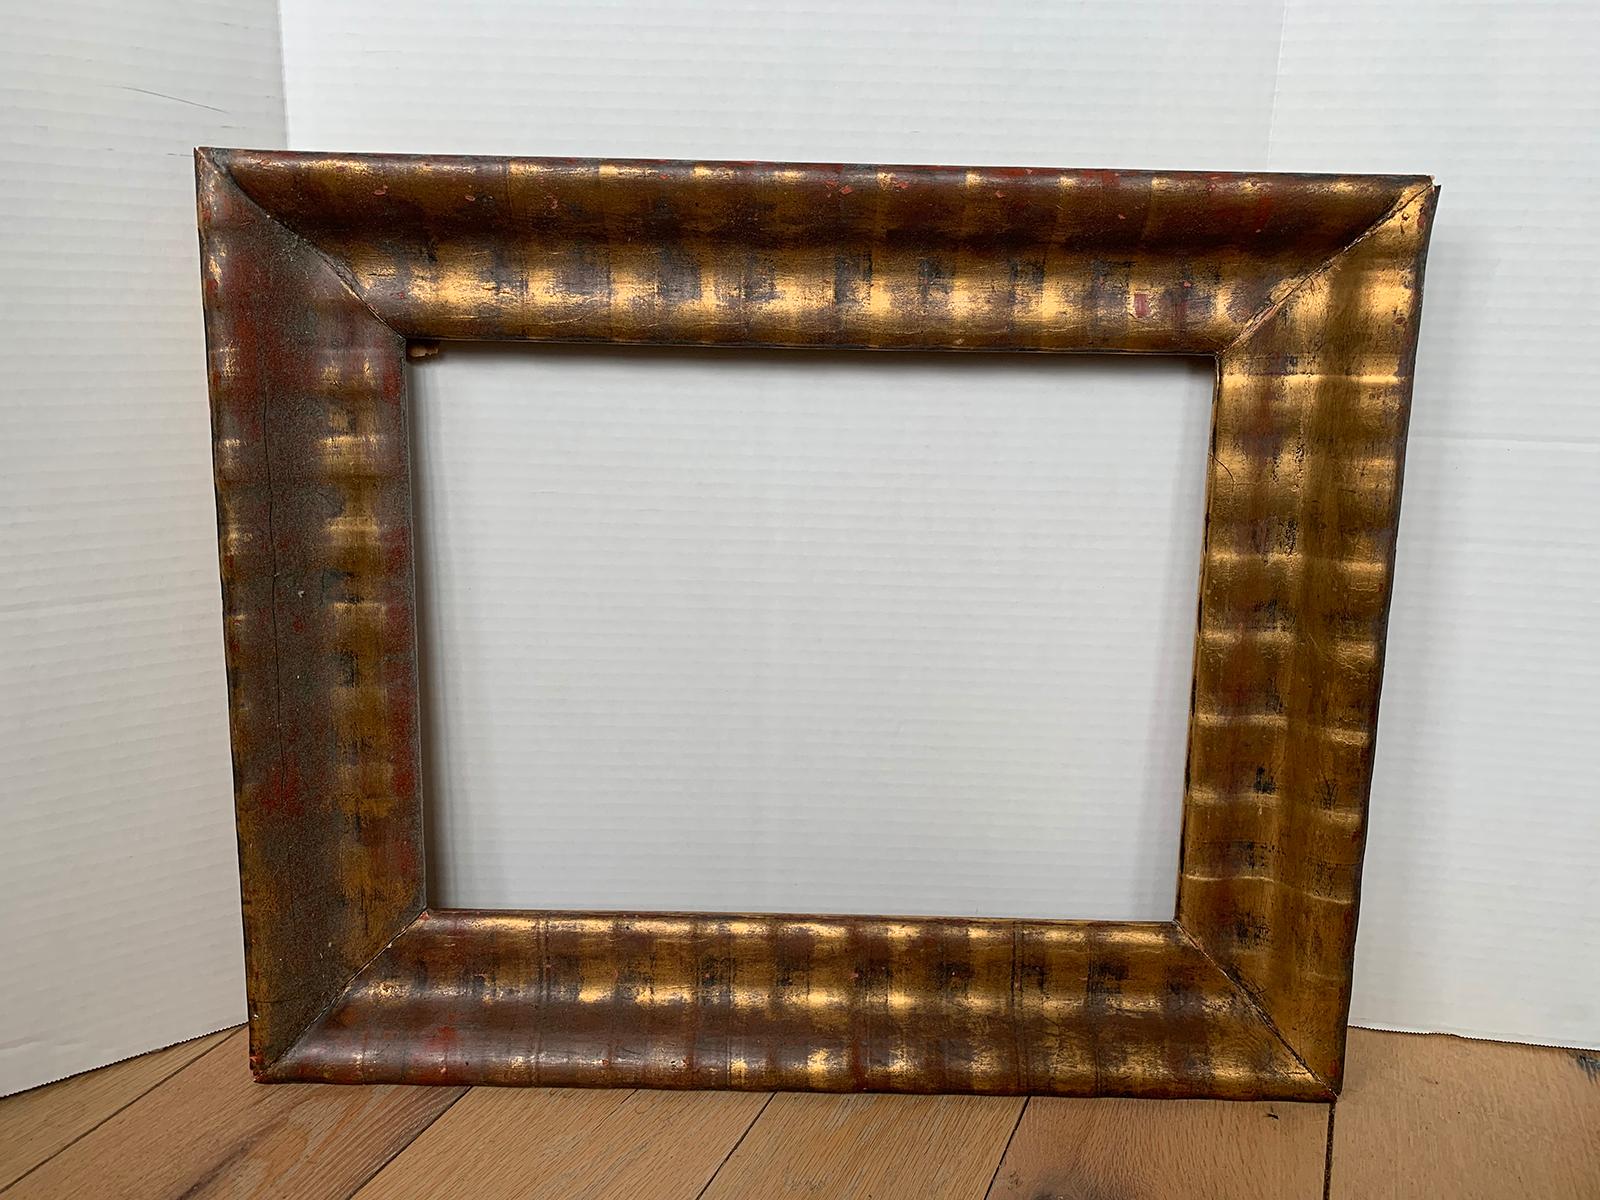 20th century Italian giltwood frame
Measures: Overall 23.5